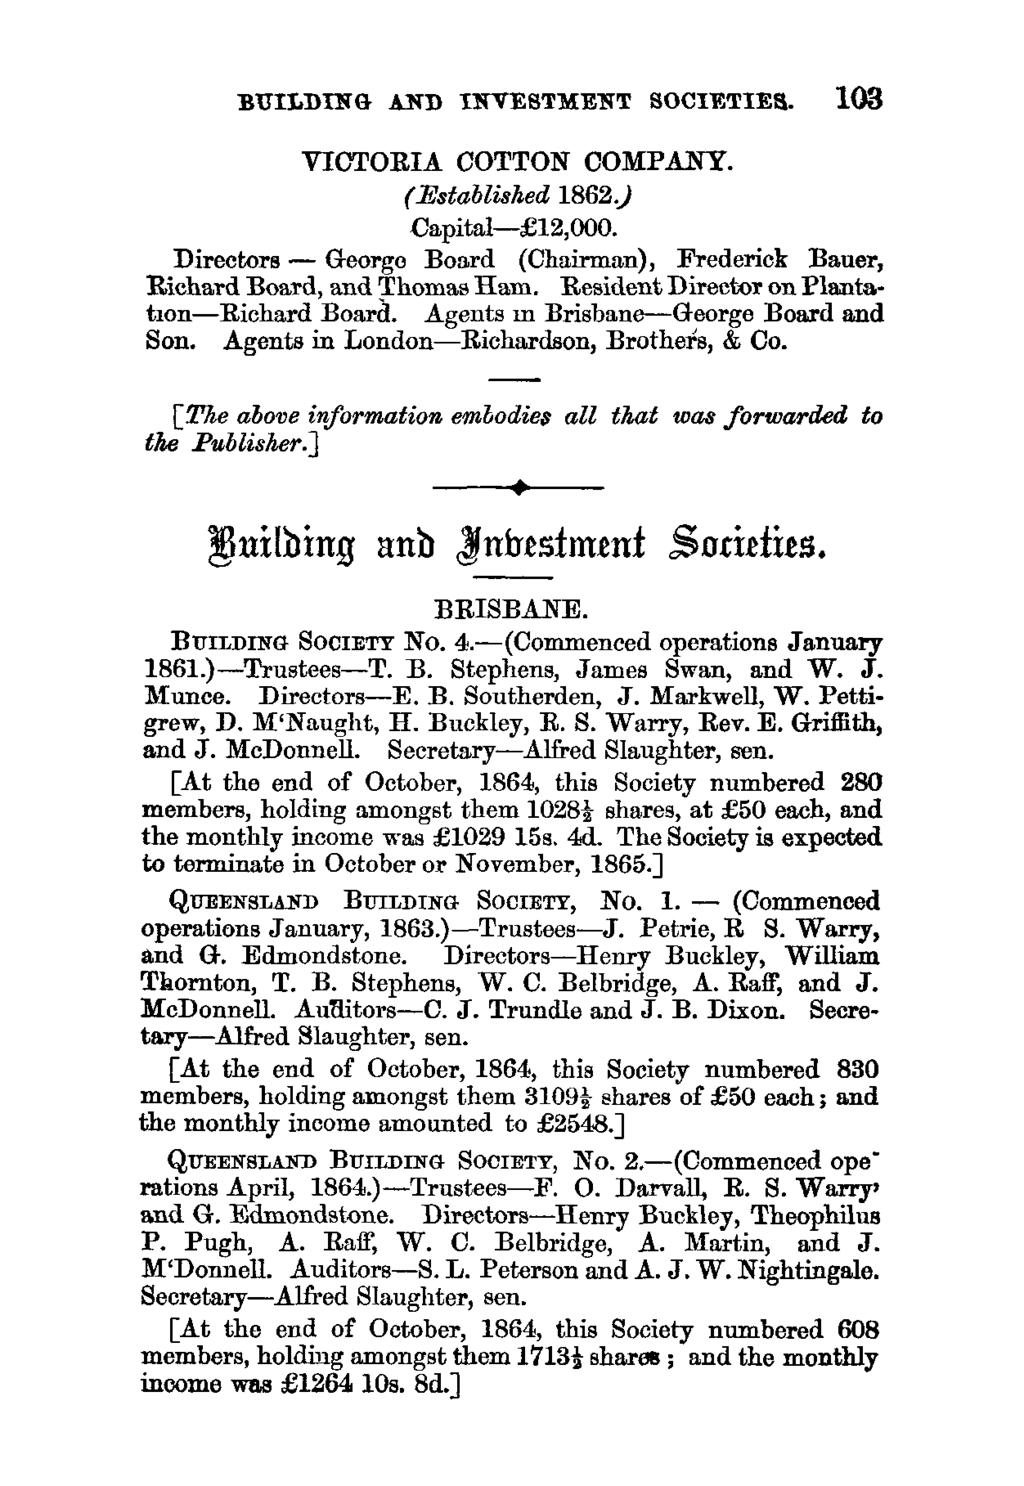 BUILDING AND INVESTMENT SOCIETIES. 103 VICTORIA COTTON COMPANY. (Established 1862.) Capital- 12,000. Directors - George Board (Chairman), Frederick Bauer, Richard Board, and Thomas Ham.